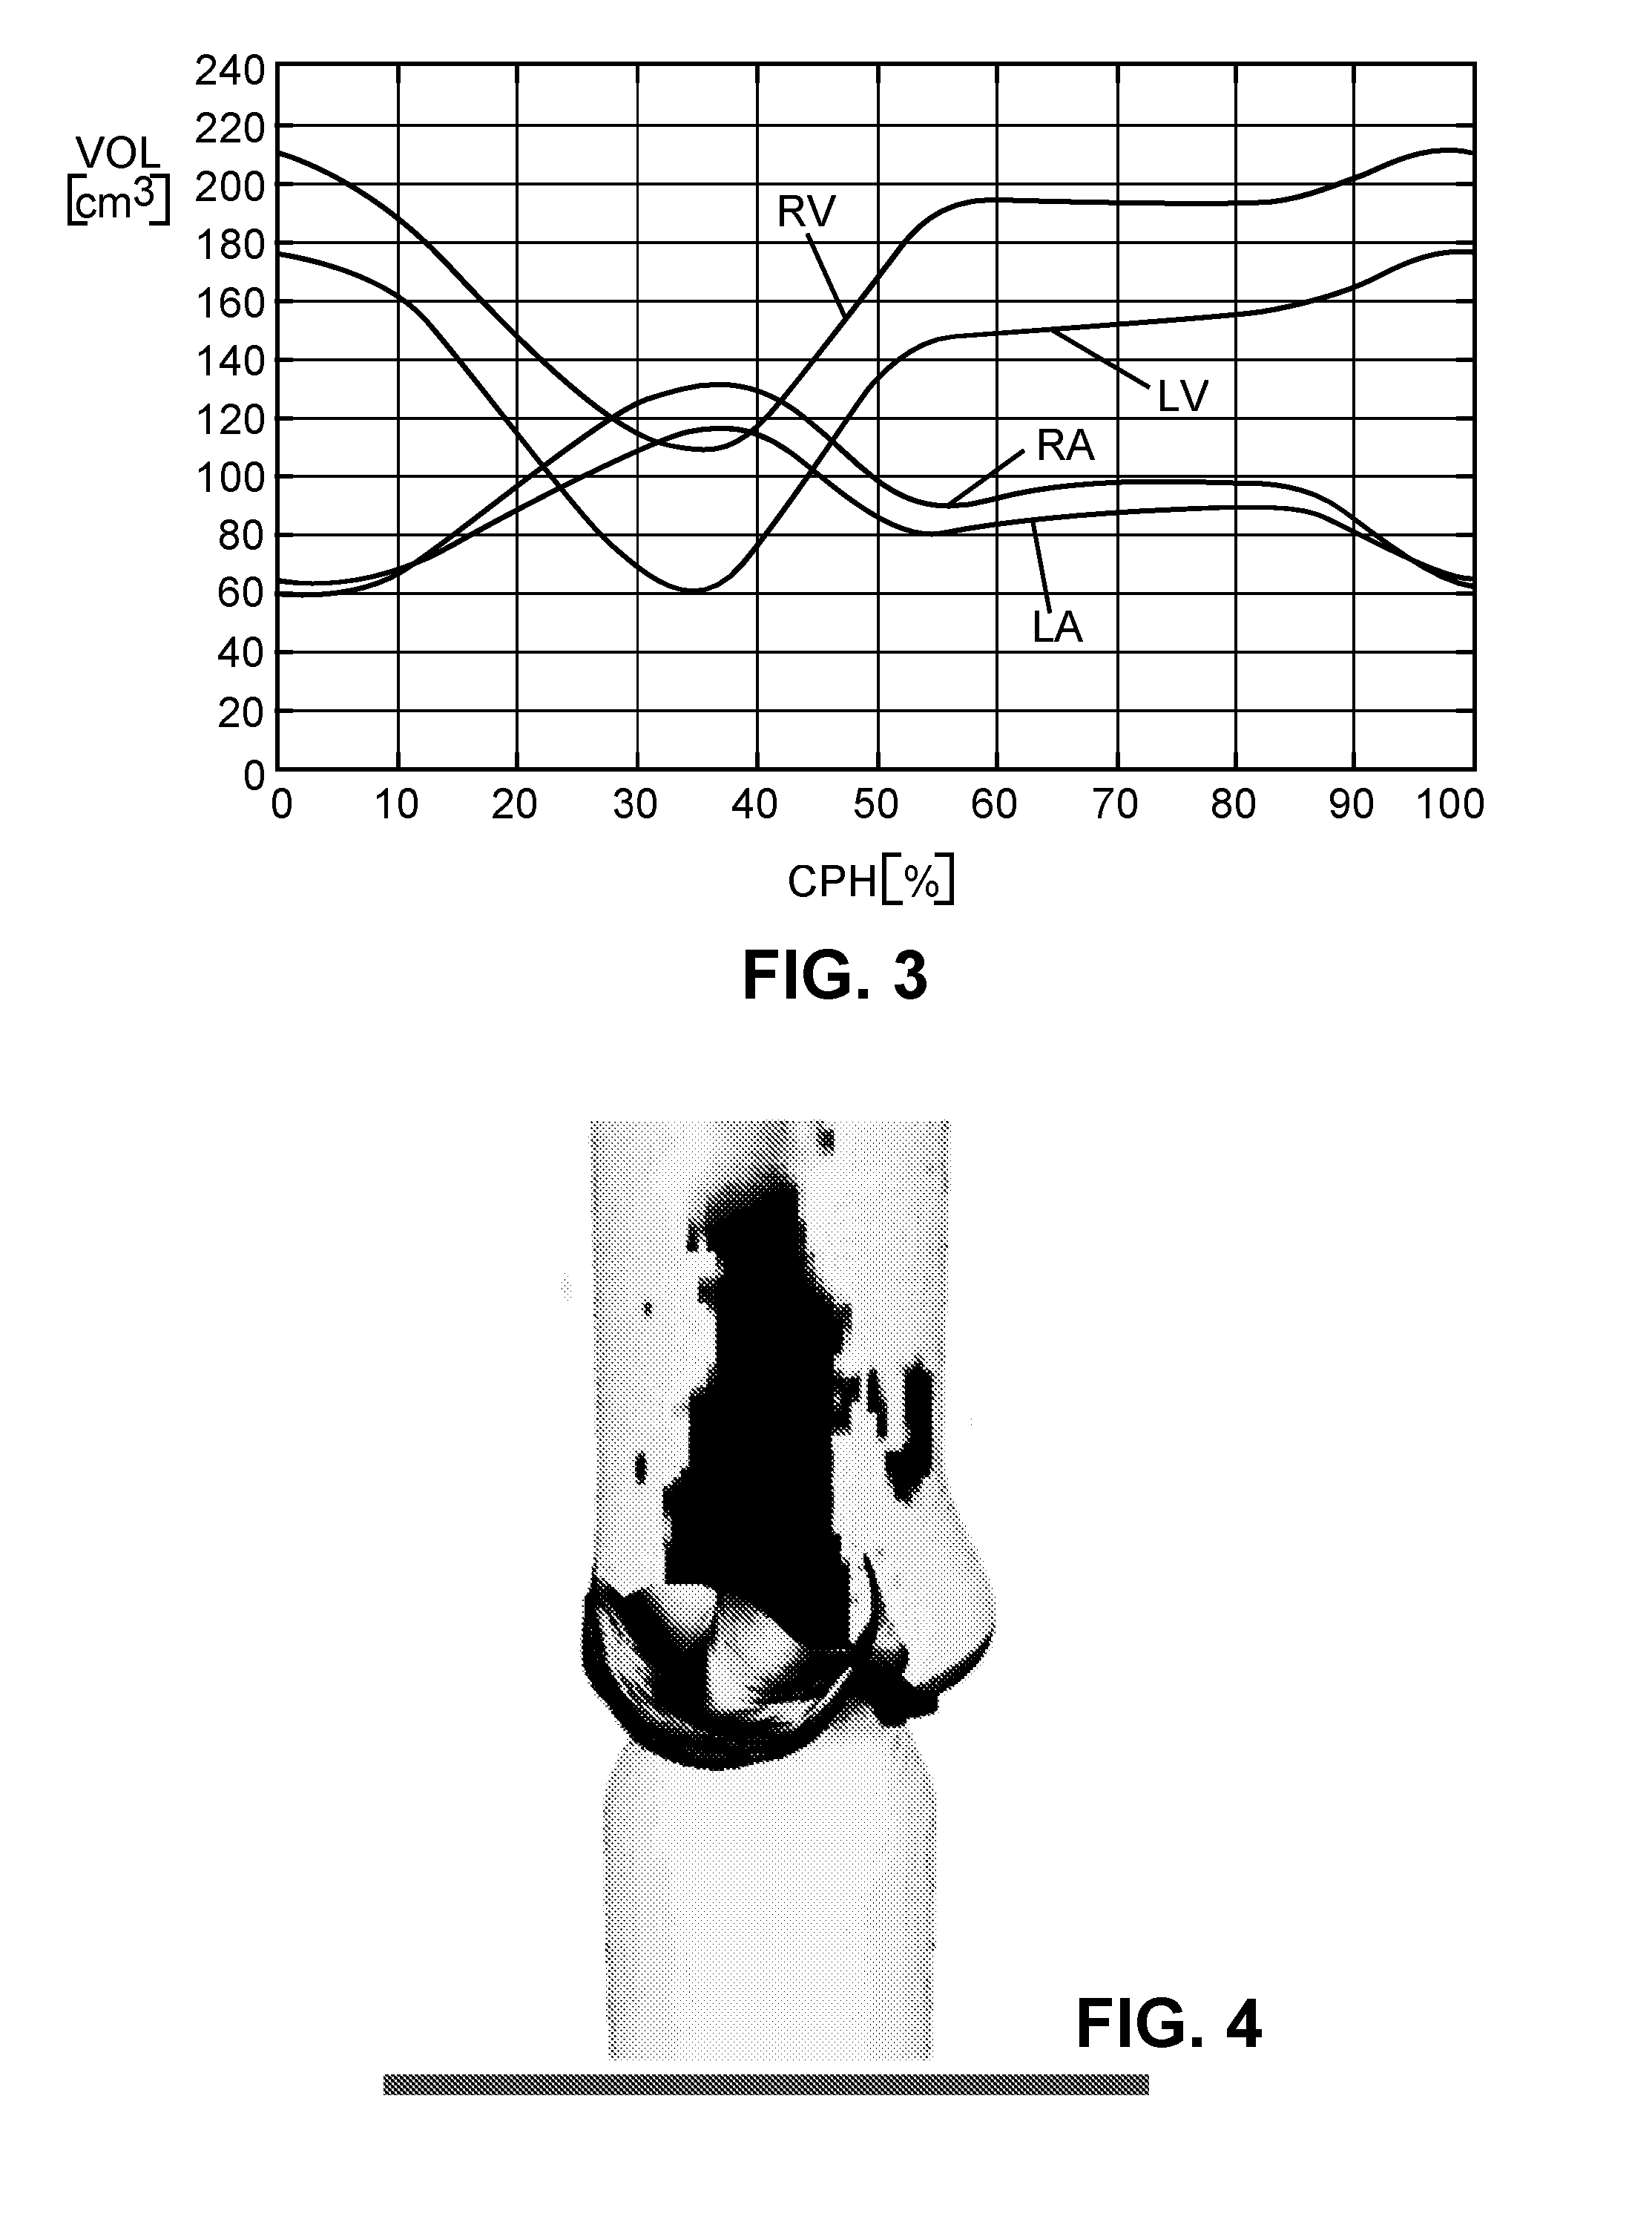 Method and apparatus for simulating blood flow under patient-specific boundary conditions derived from an estimated cardiac ejection output